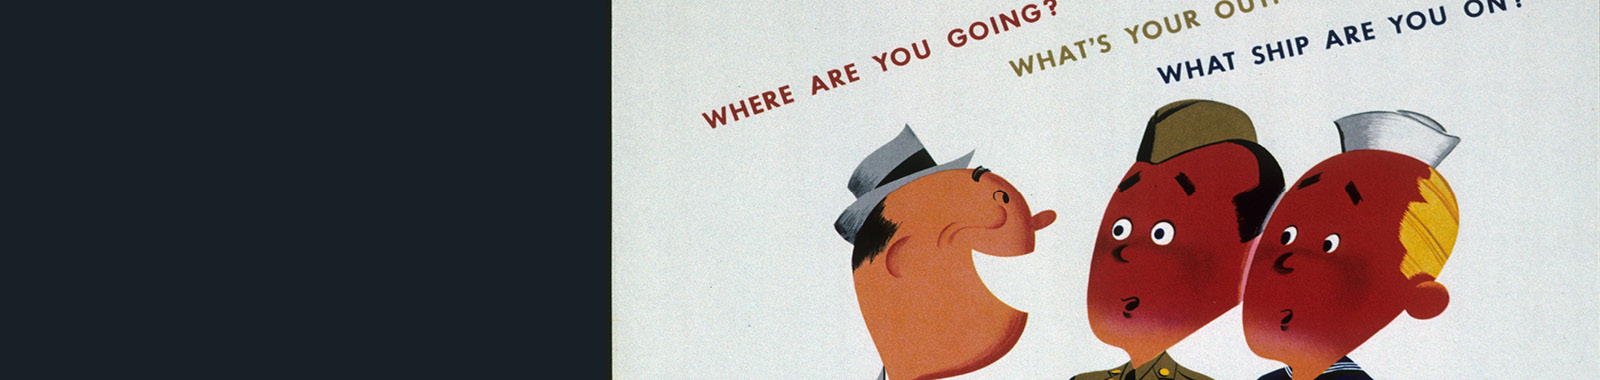 WWII-era poster of man asking two enlisted soldiers questions